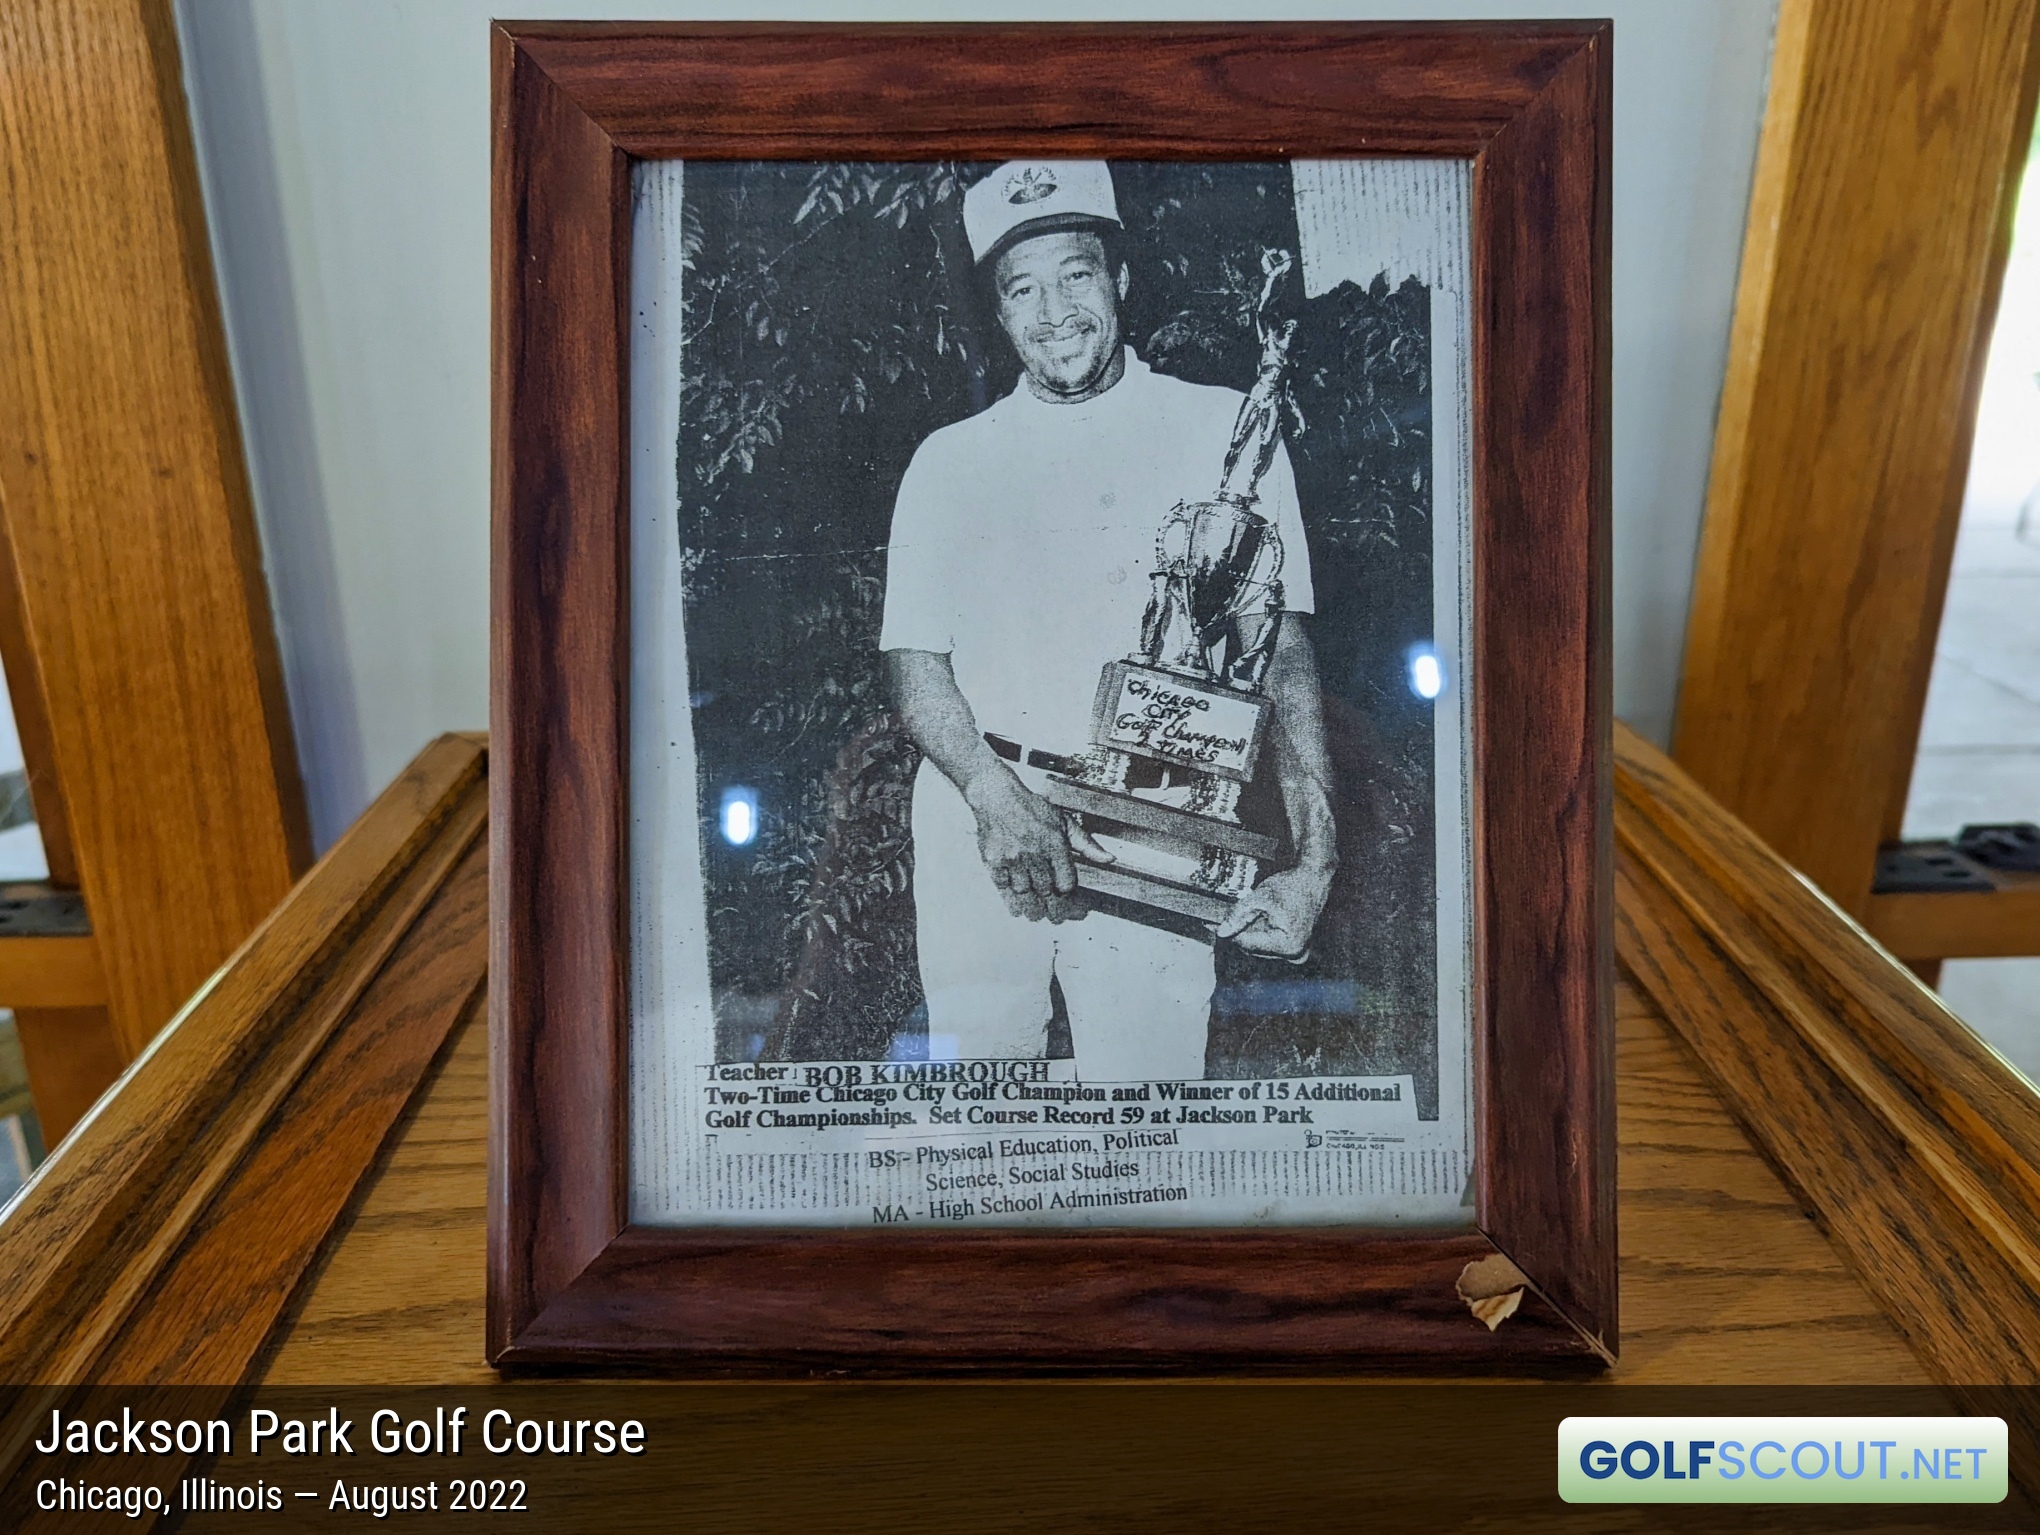 Miscellaneous photo of Jackson Park Golf Course in Chicago, Illinois. Bob Kimbrough, two time Chicago City Golf Champion and winner of 15 additional golf championships. Set course record of 59 at Jackson Park.